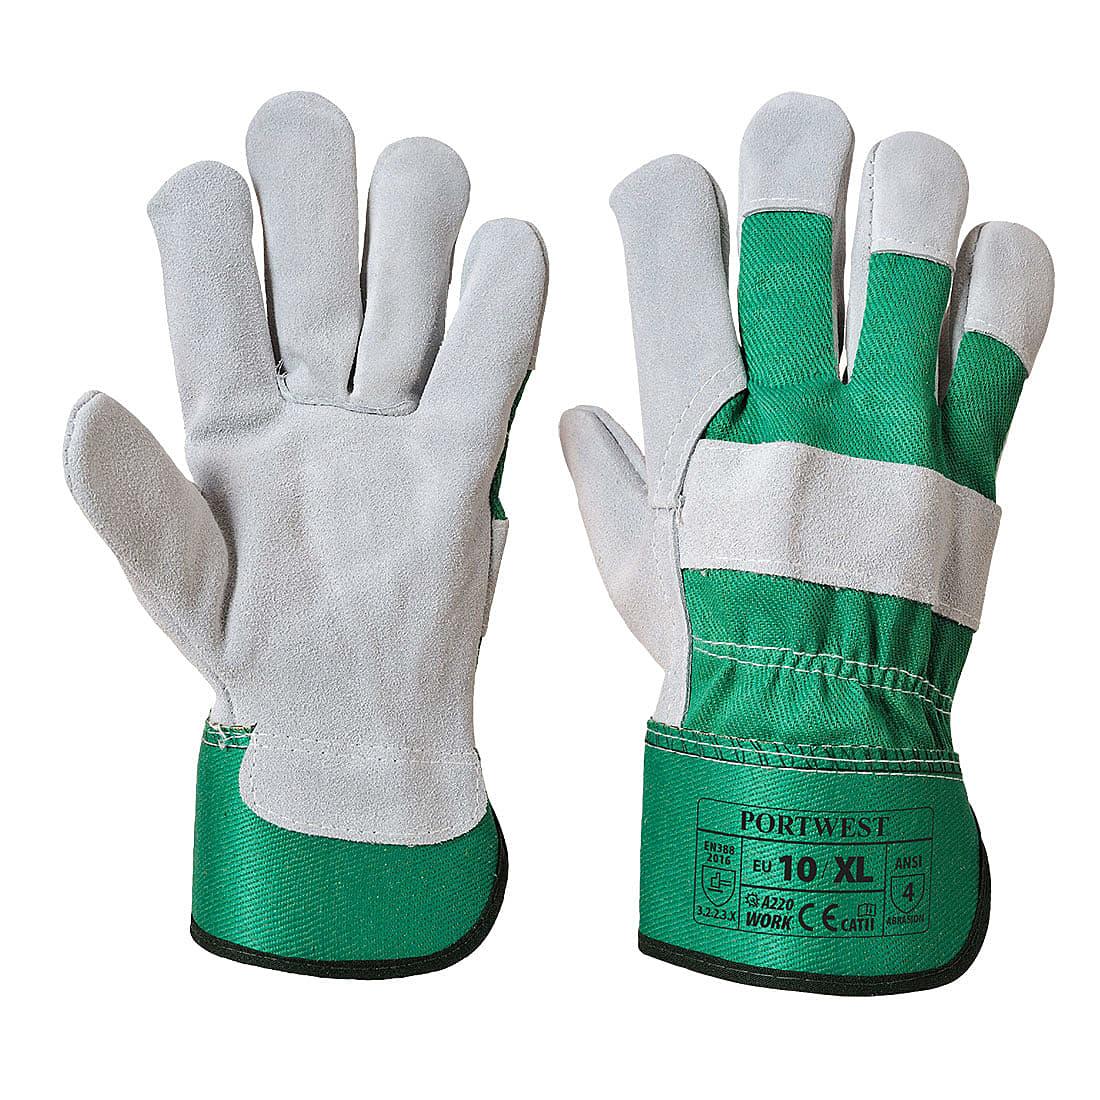 Portwest Premium Chrome Rigger Gloves in Green (Product Code: A220)